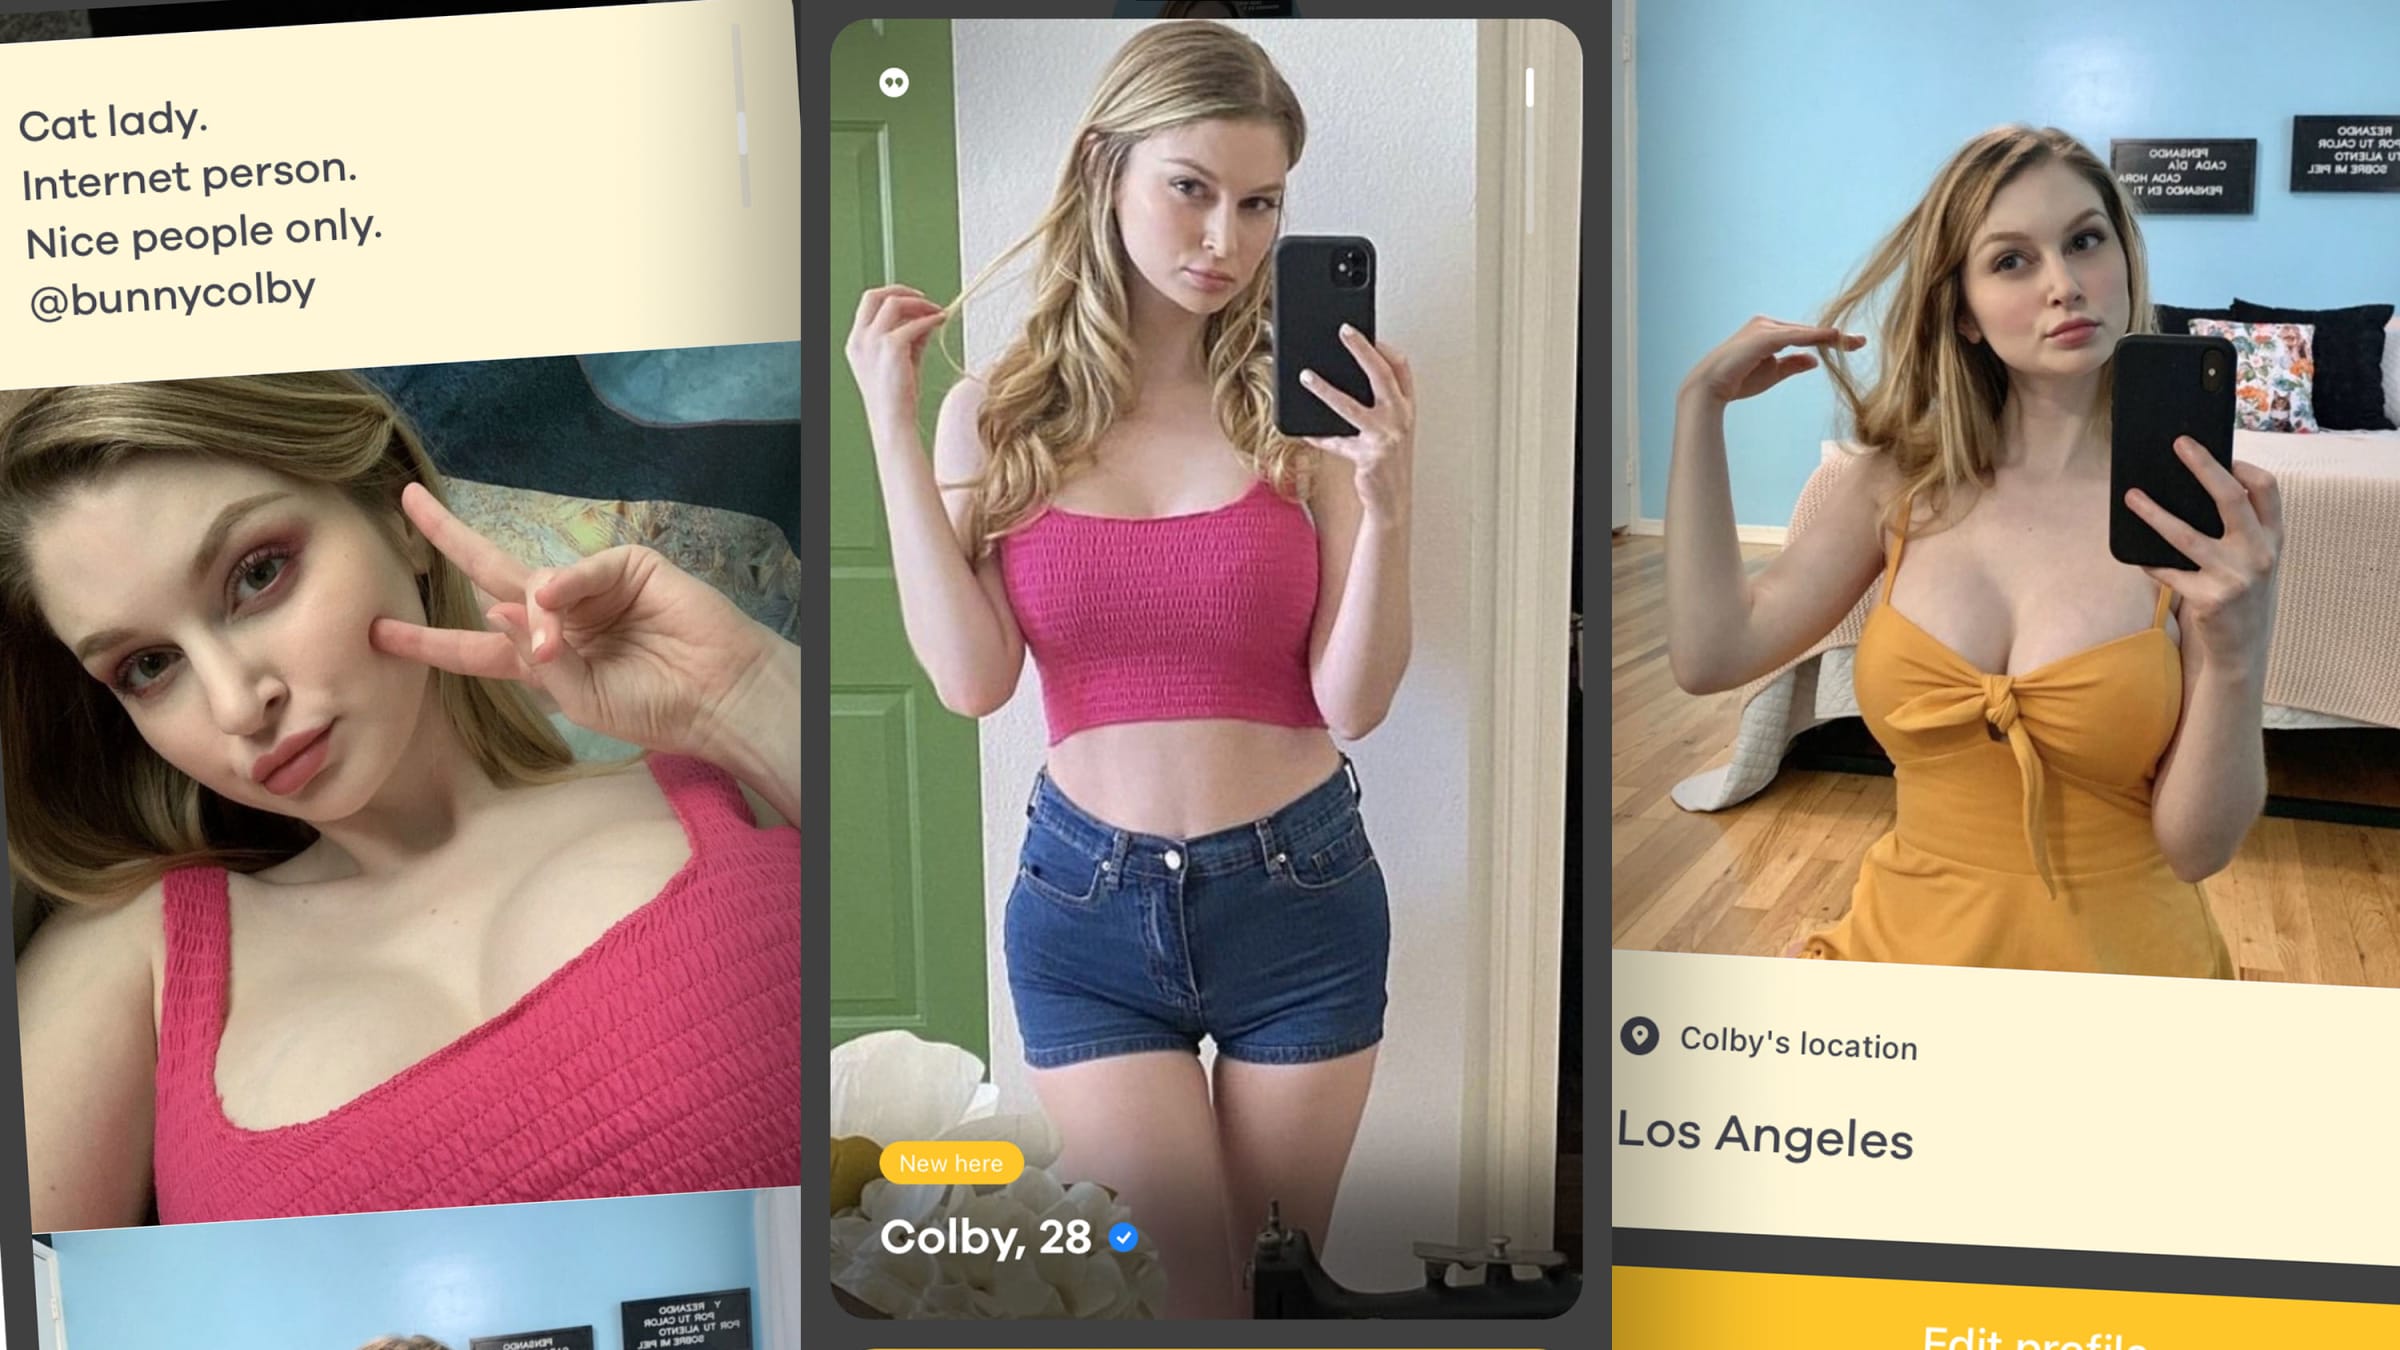 She Was Booted From Bumble for Being a Porn Star